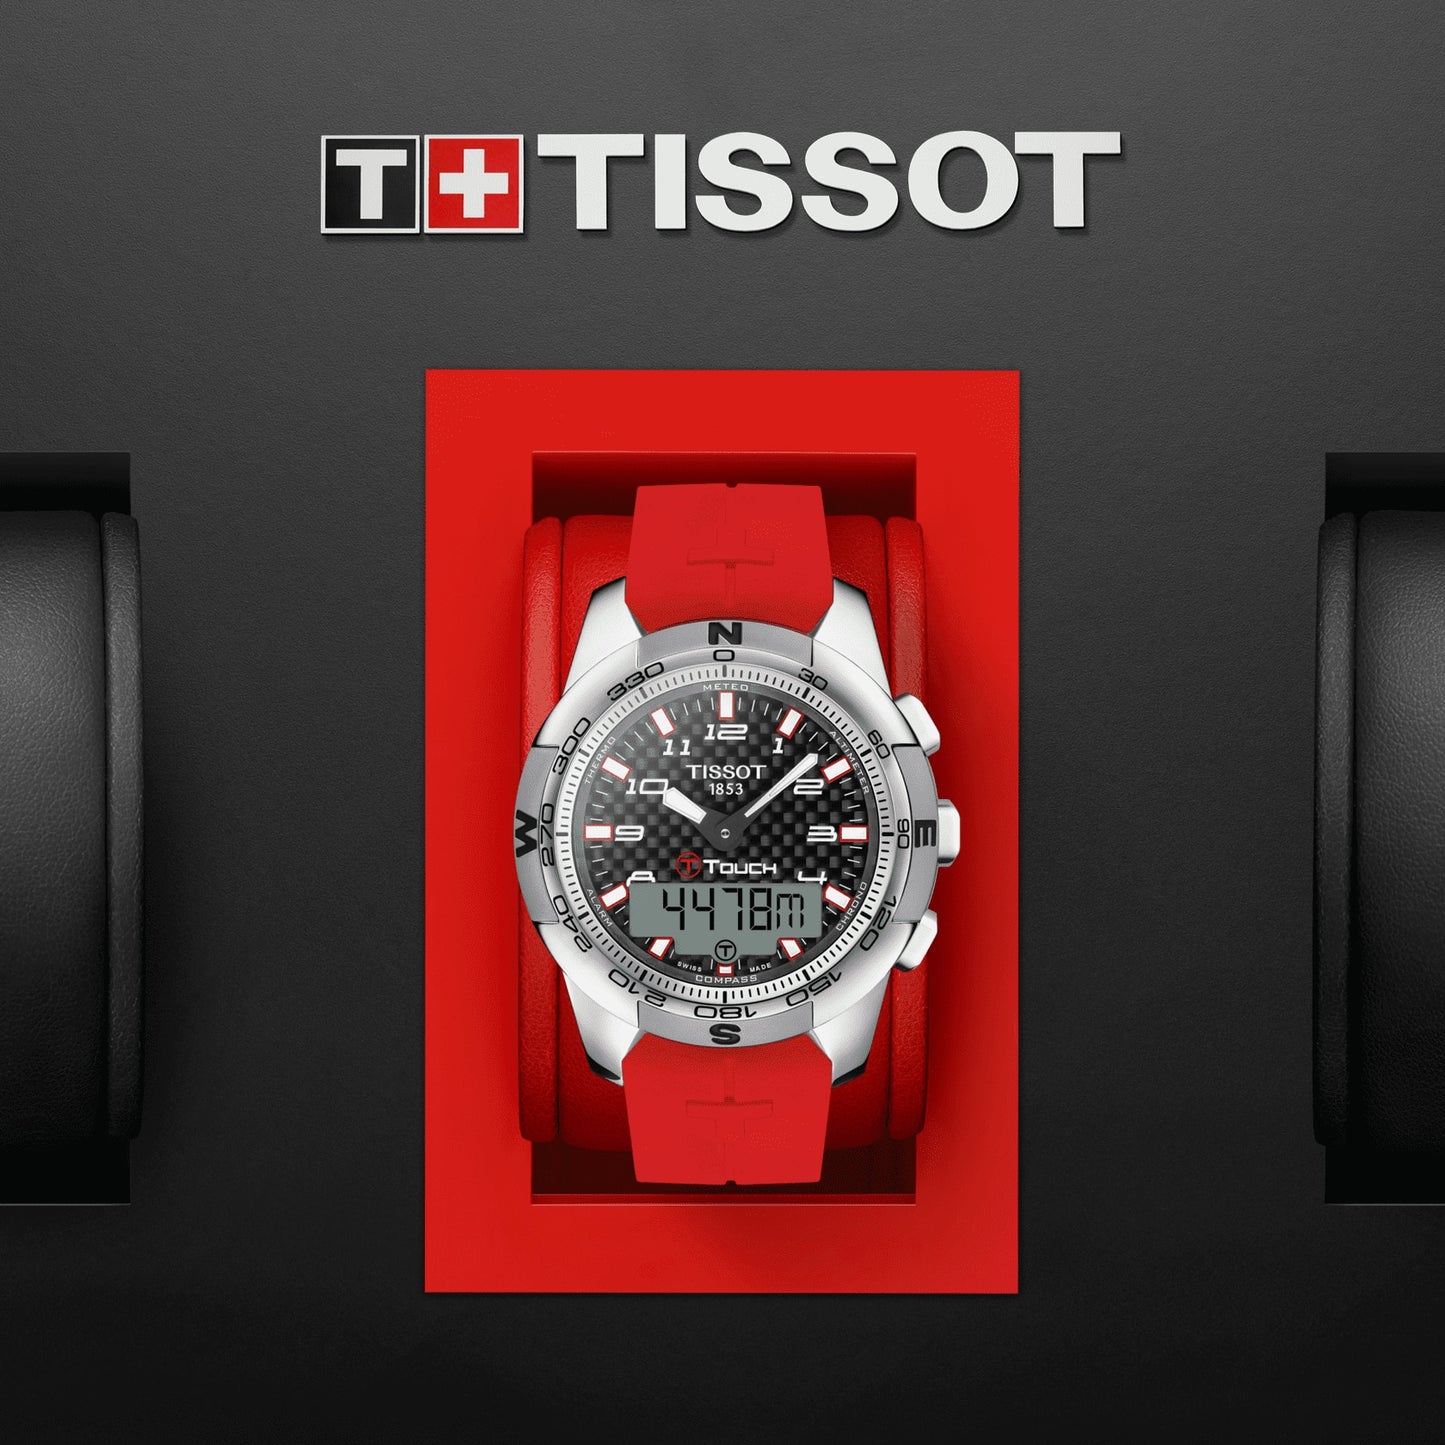 Tissot T-Touch II RBS 6 Nations